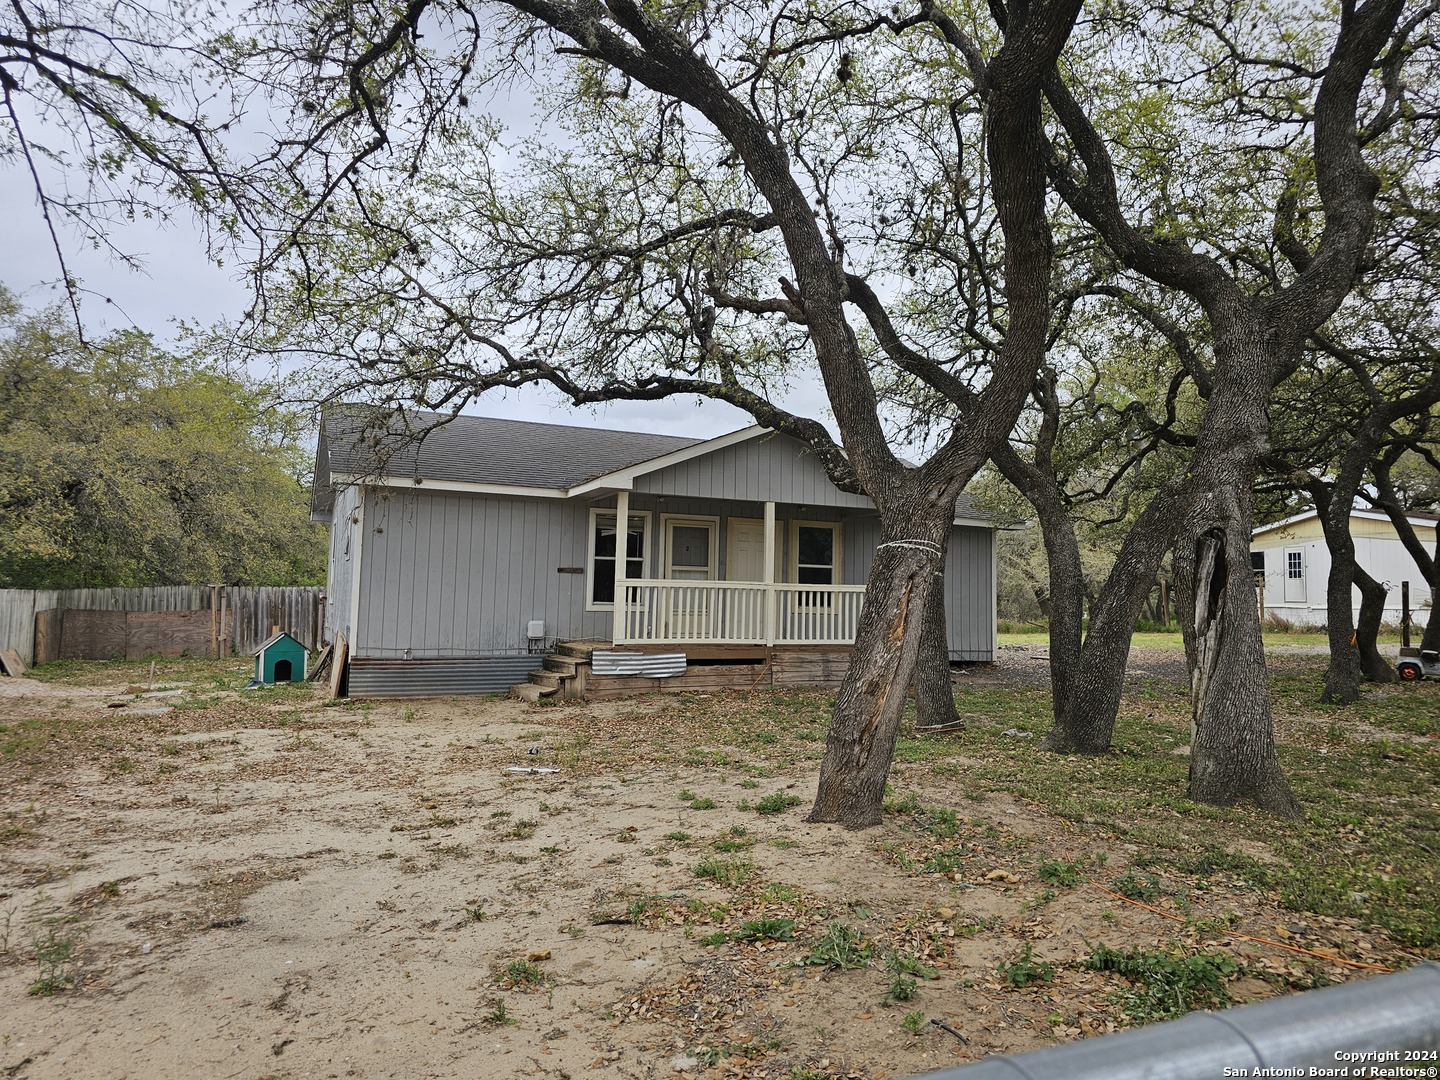 Photo of 490 Timbercreek Dr in Poteet, TX